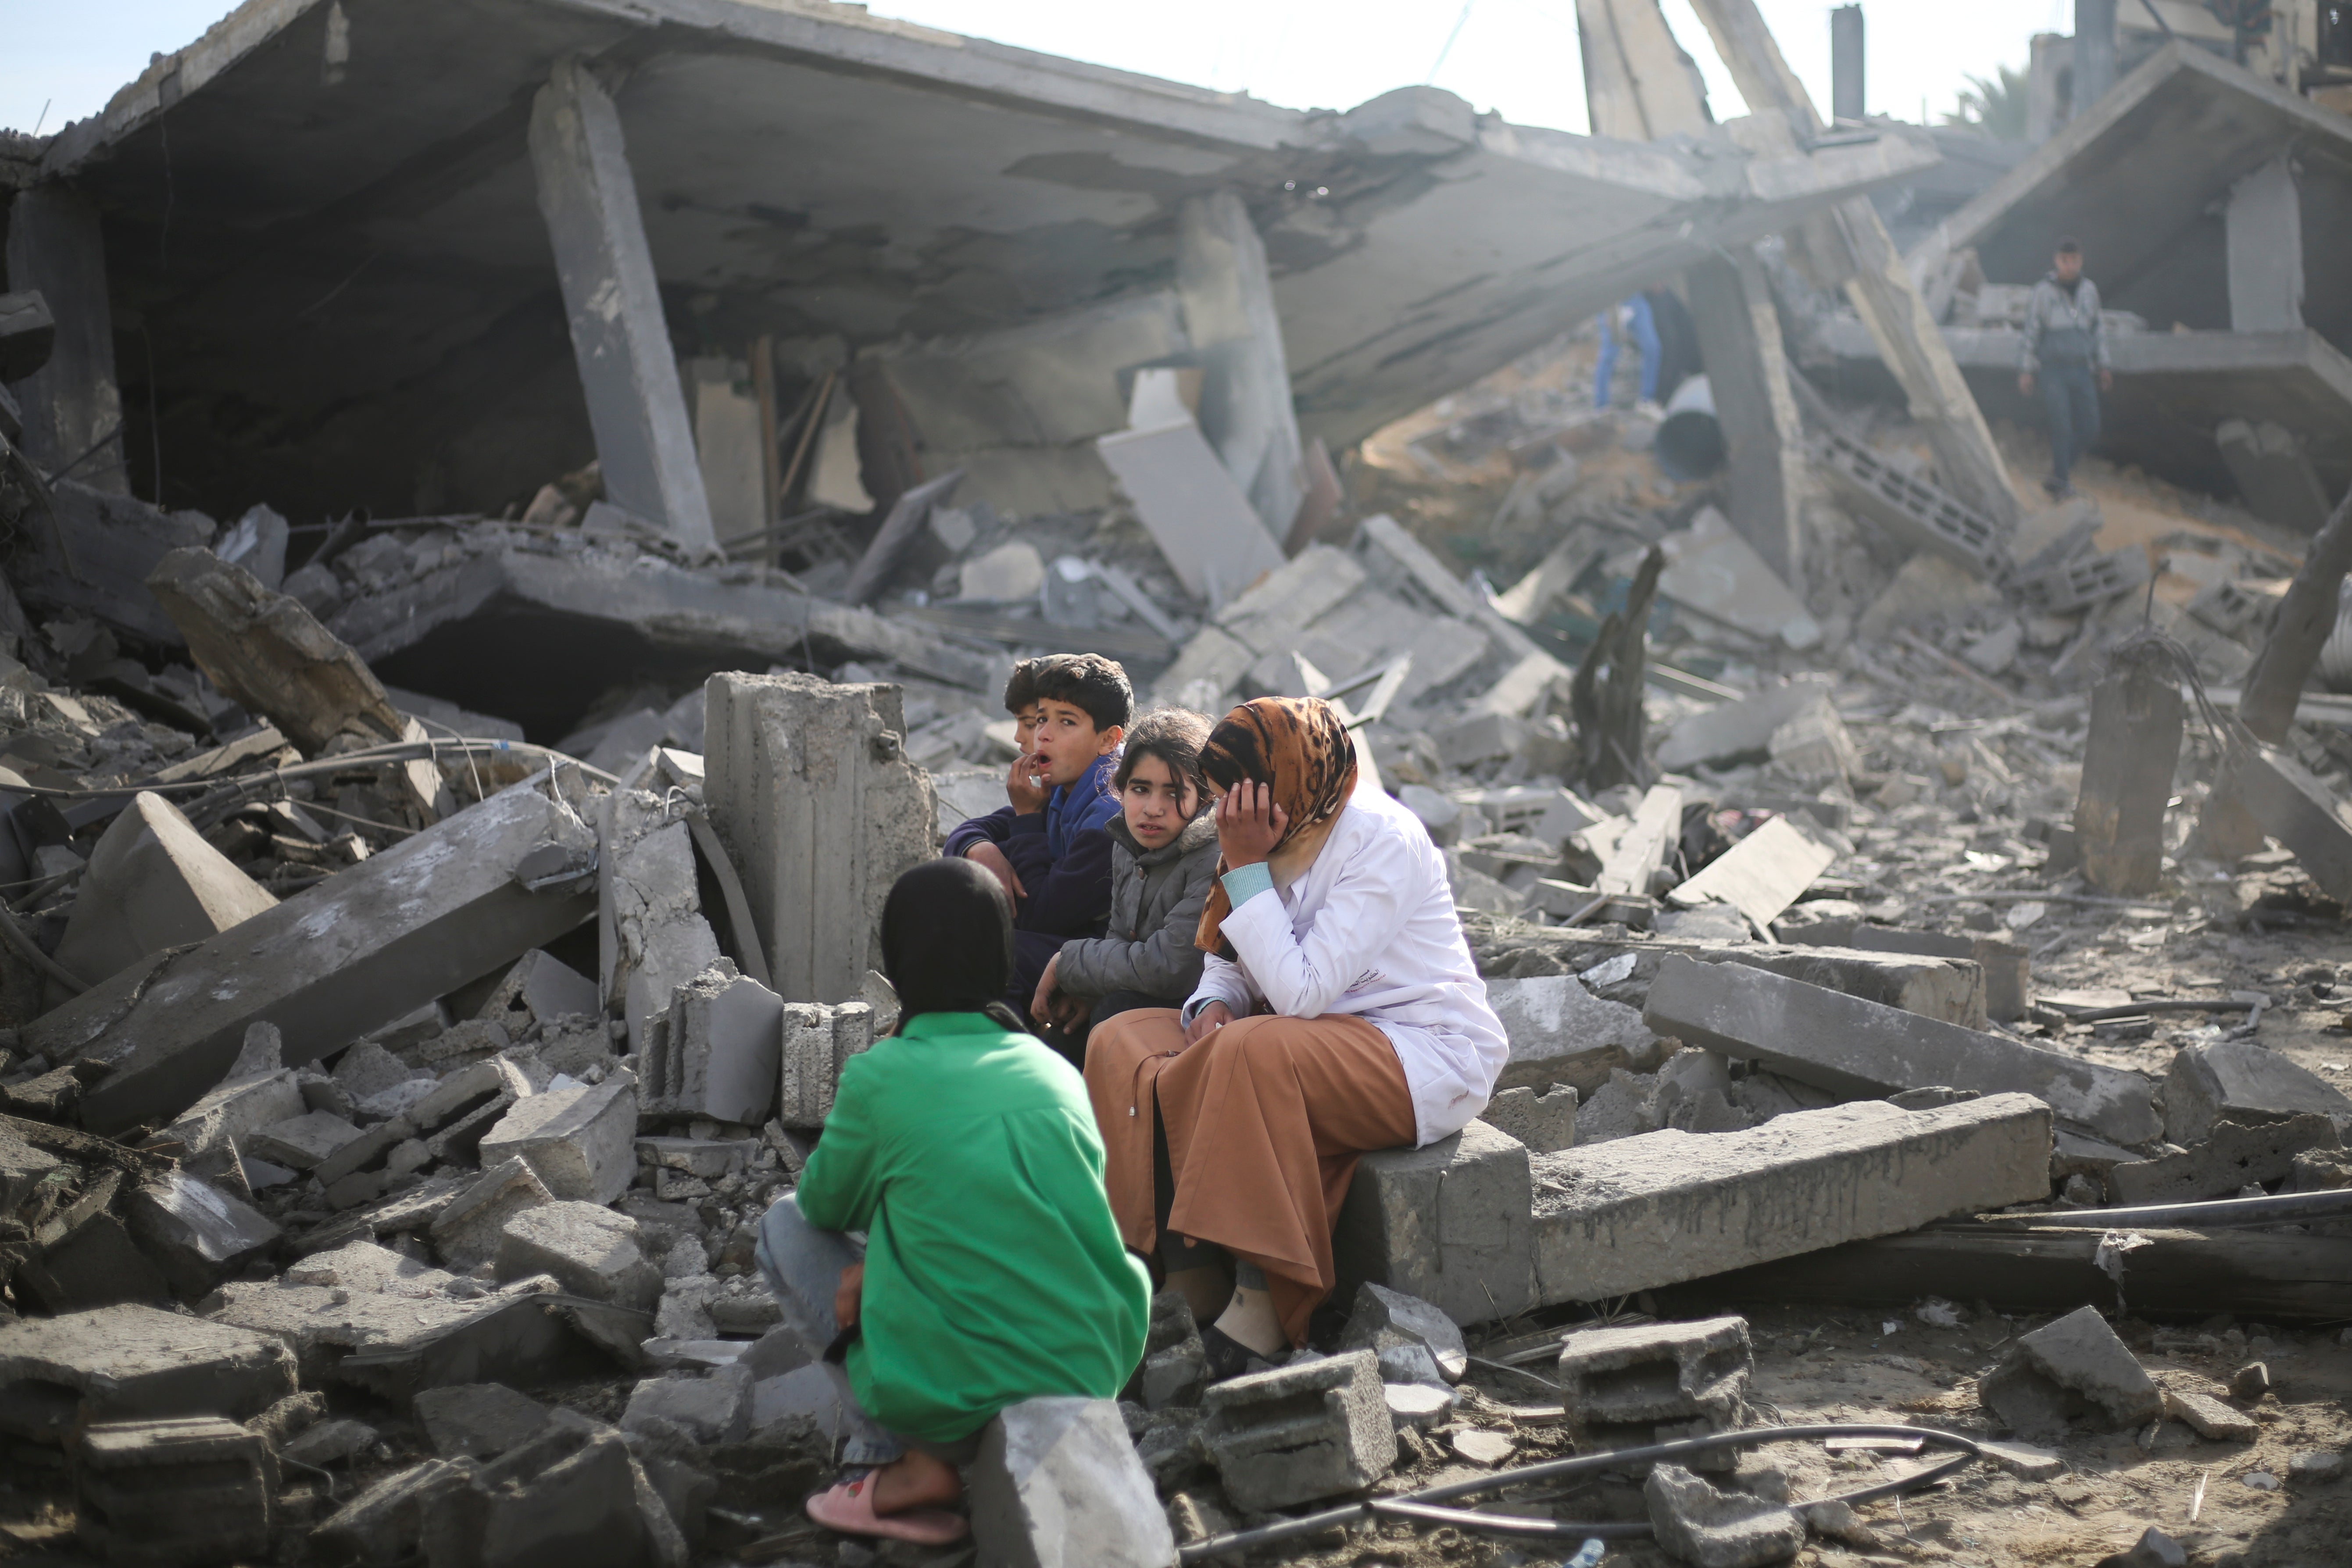 Palestinians sit by the destruction from the Israeli bombardment of the Gaza Strip